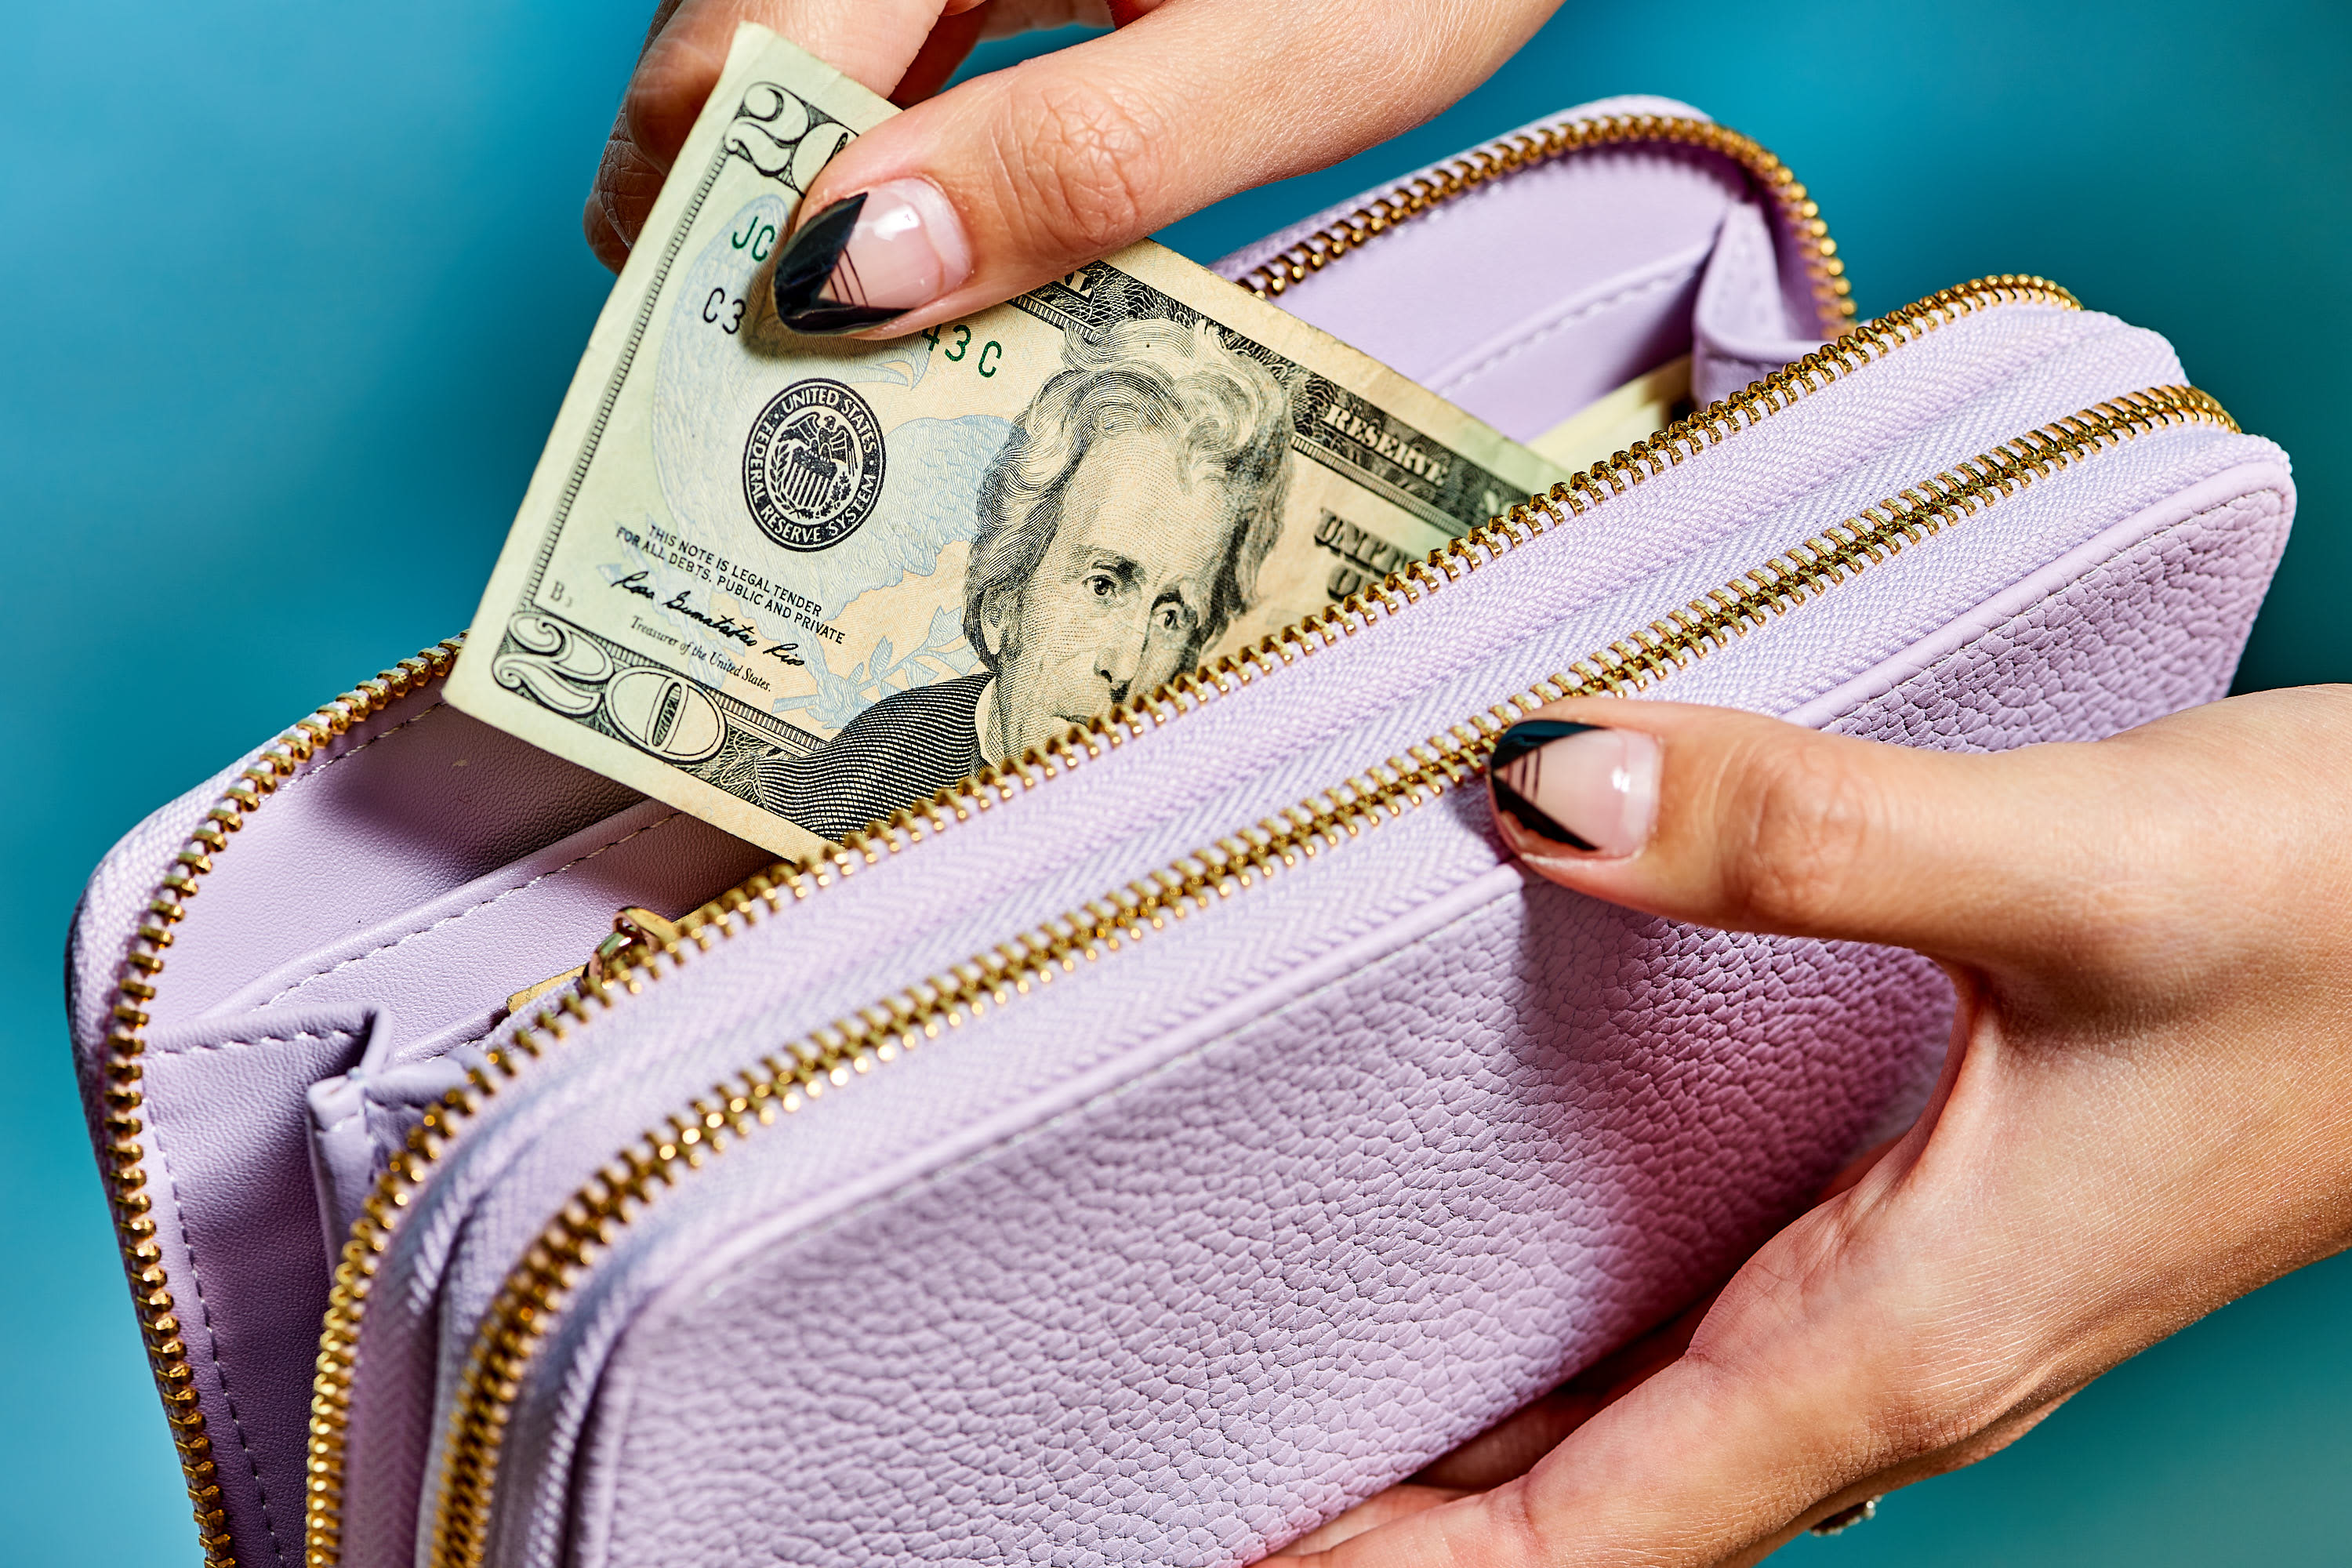 How to prevent purse theft - Tips & Tricks to keep you safe - Terlis Designs